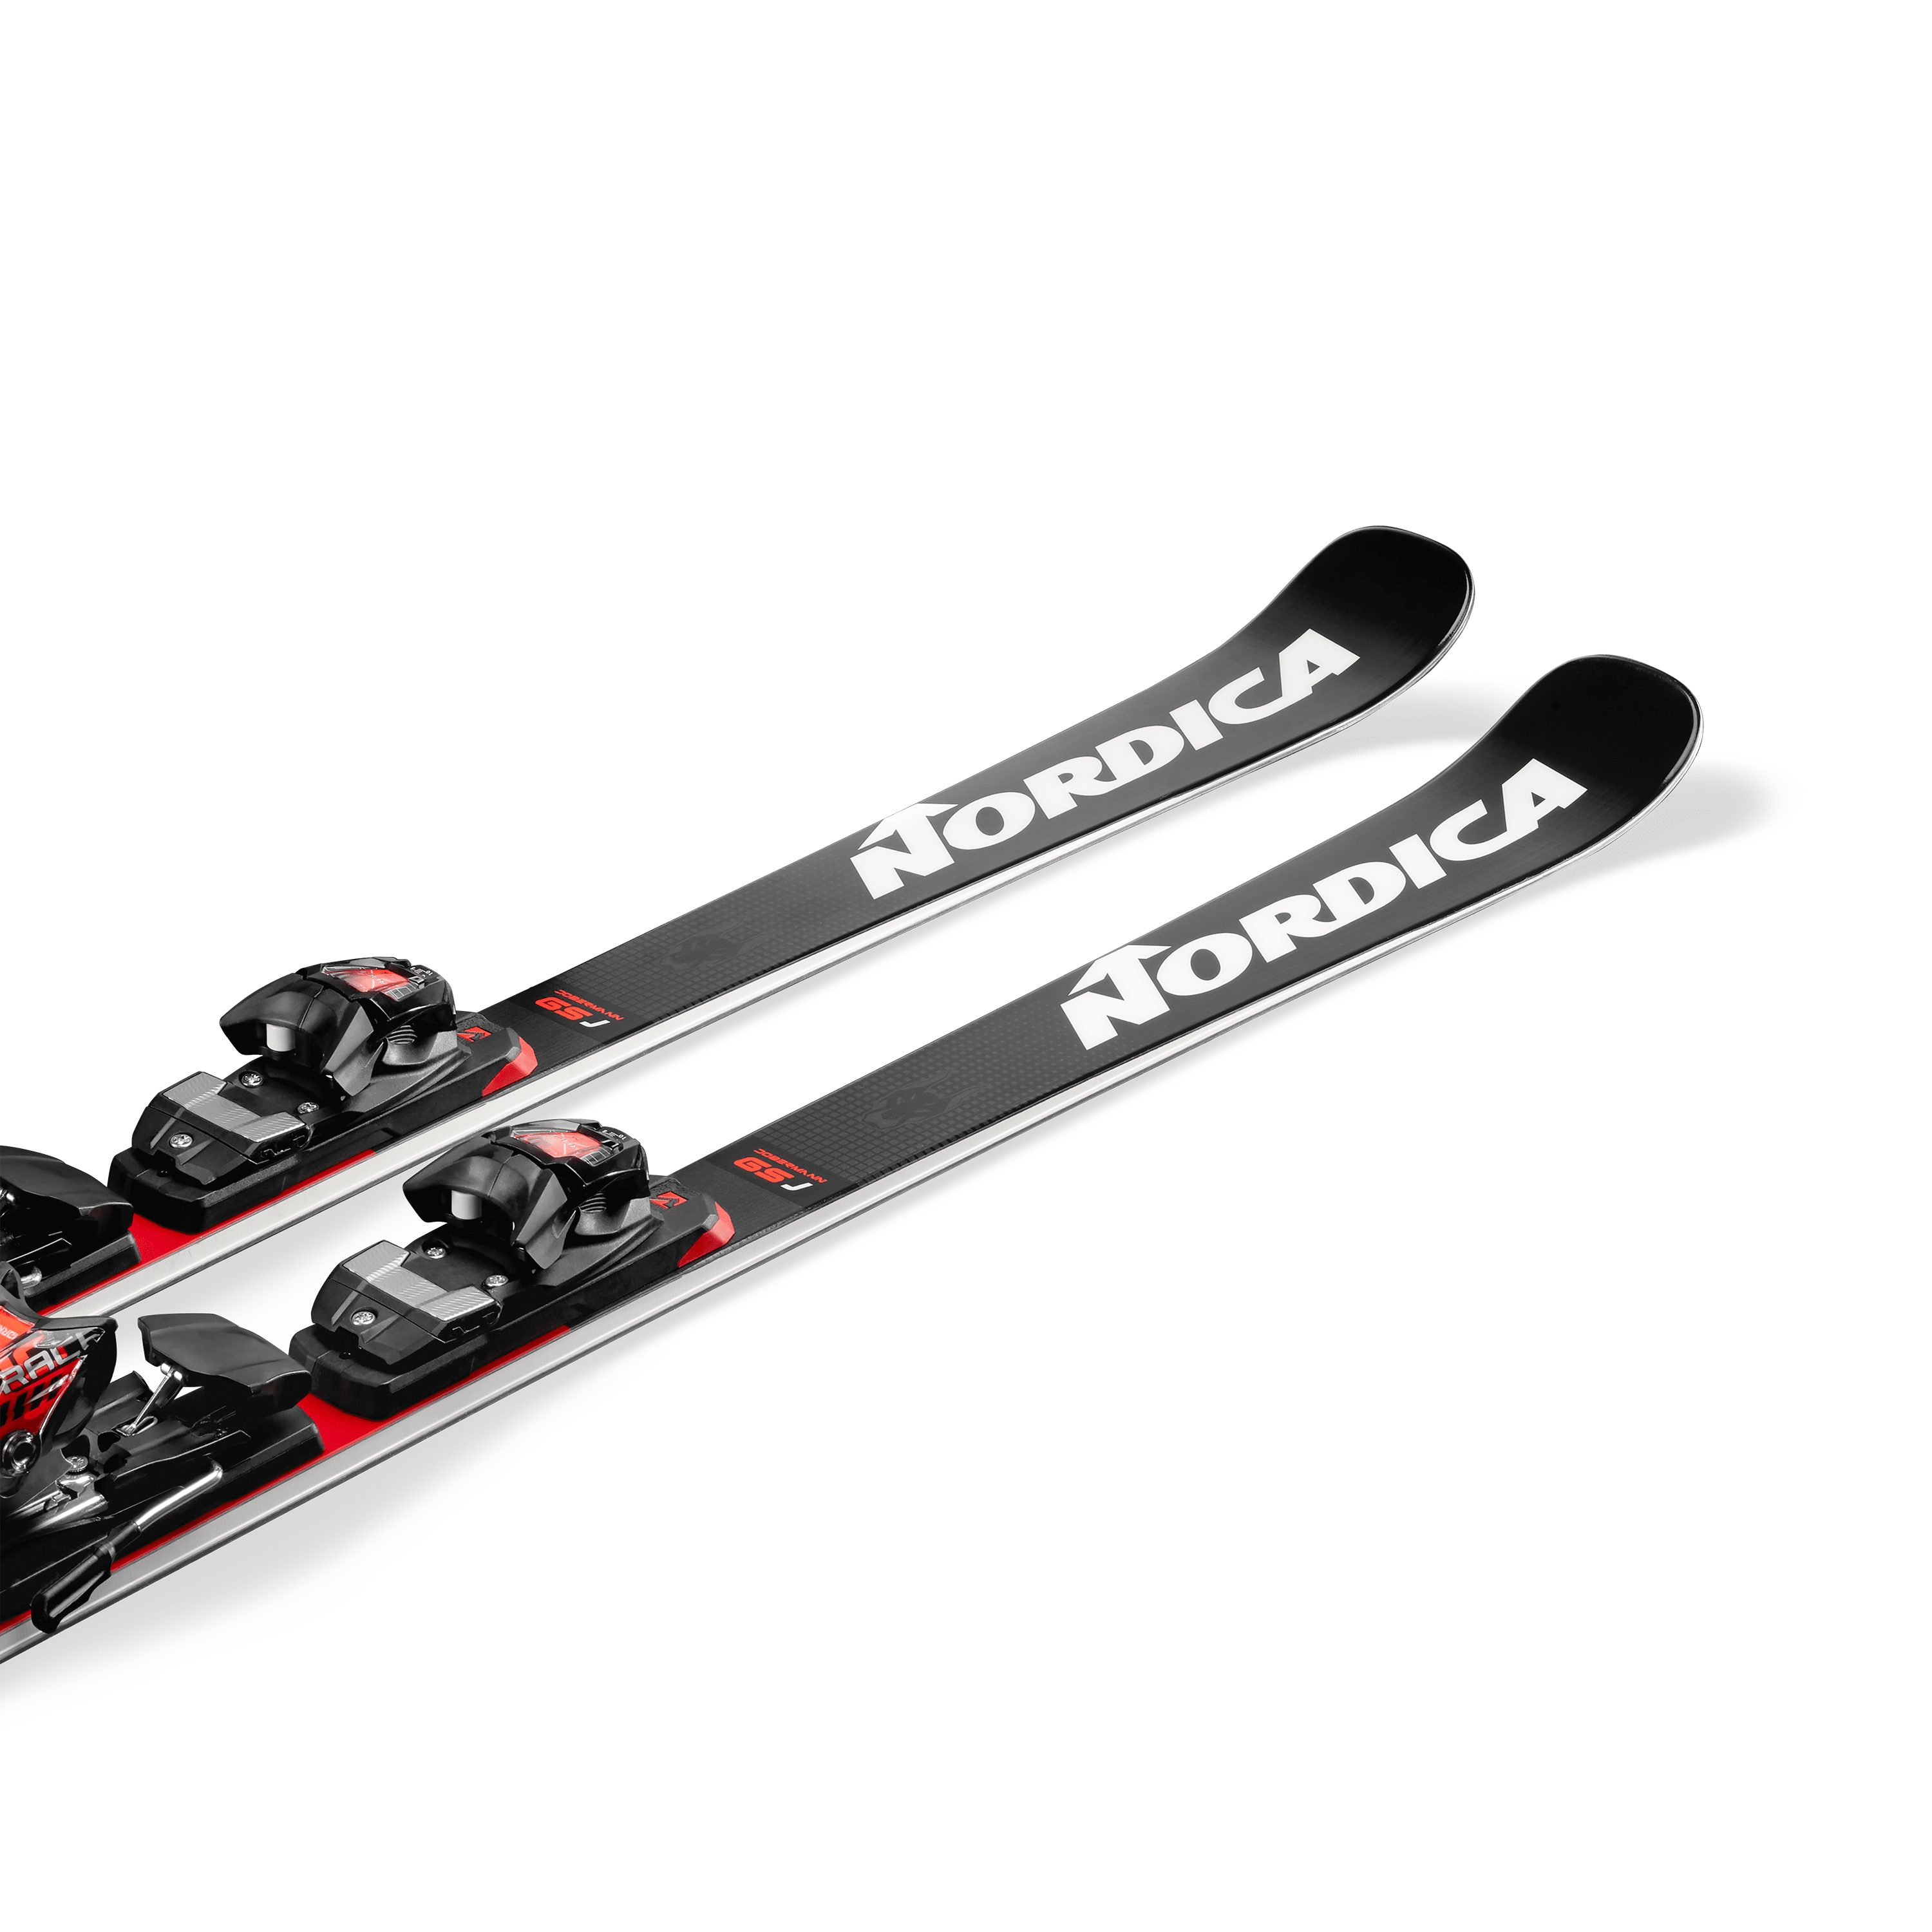 Picture of the Nordica Dobermann gsj plate skis.